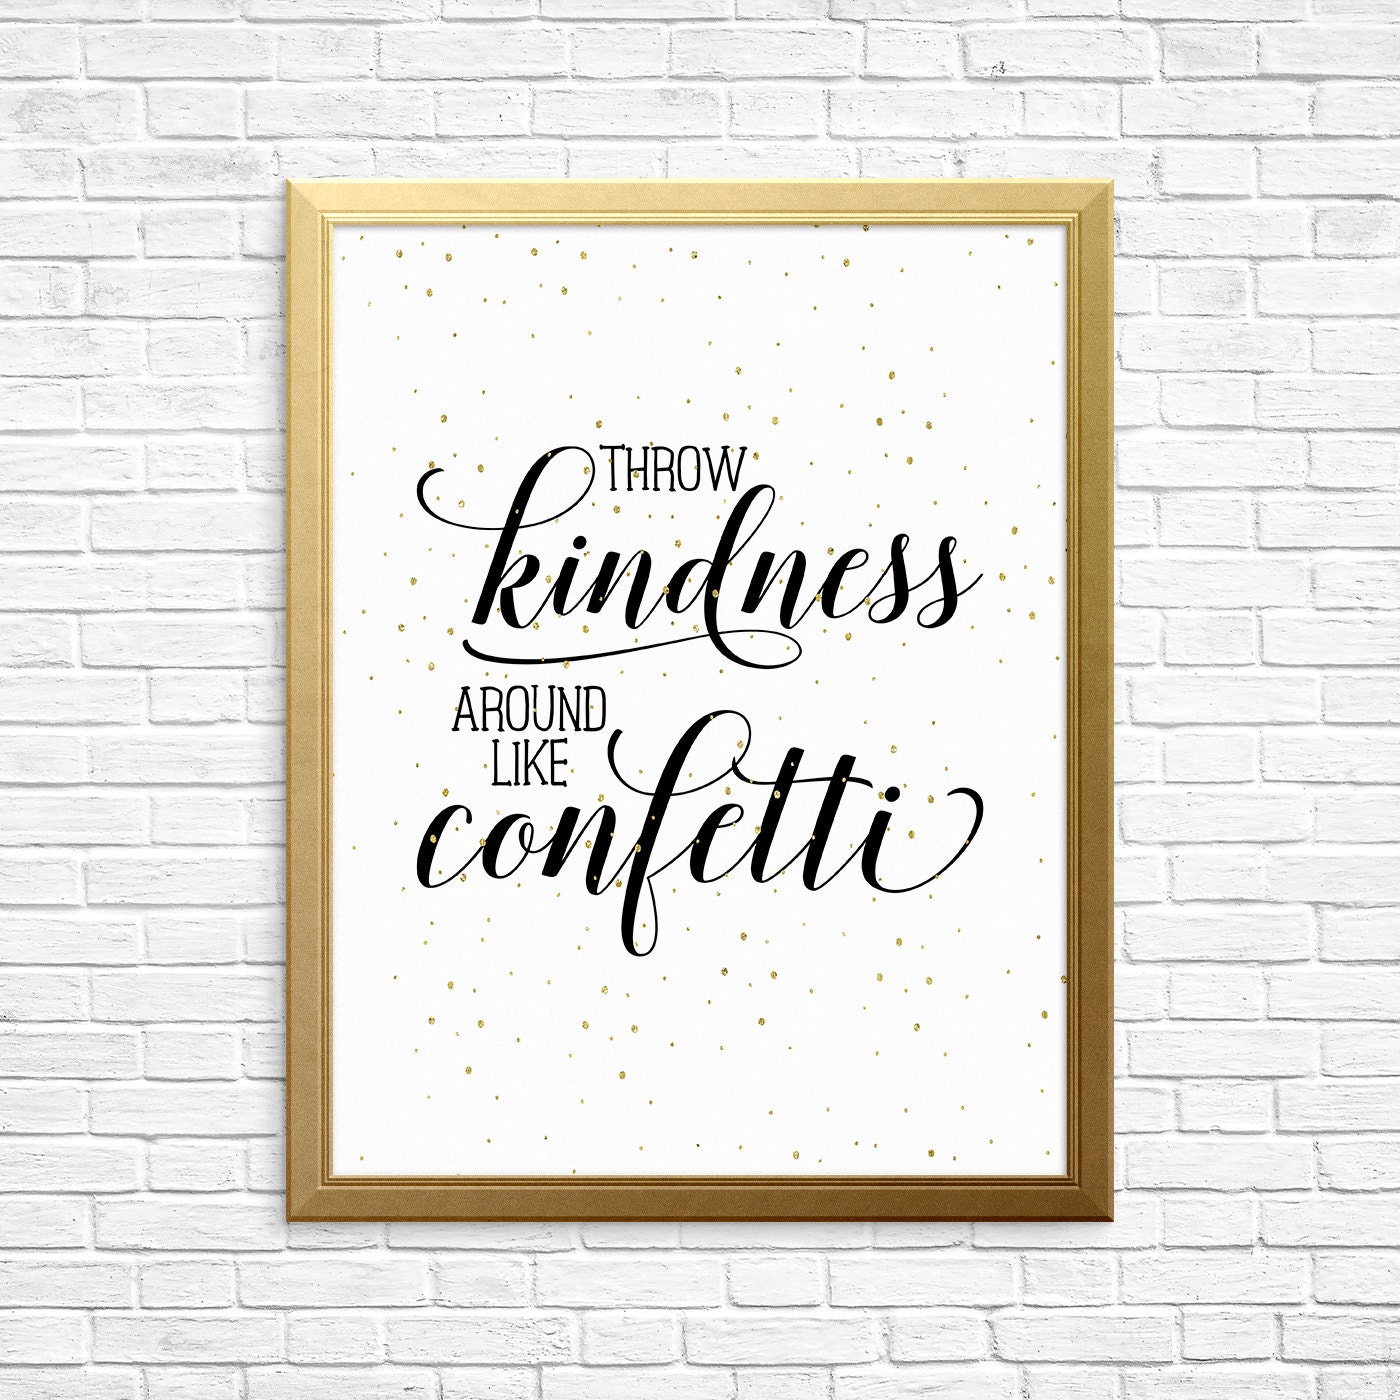 Printable Art, Throw Kindness Around Like Confetti, Wall Art, Be Kind,  Motivational Quote, Room Decor, Typography Art Print, Gold Print - Etsy